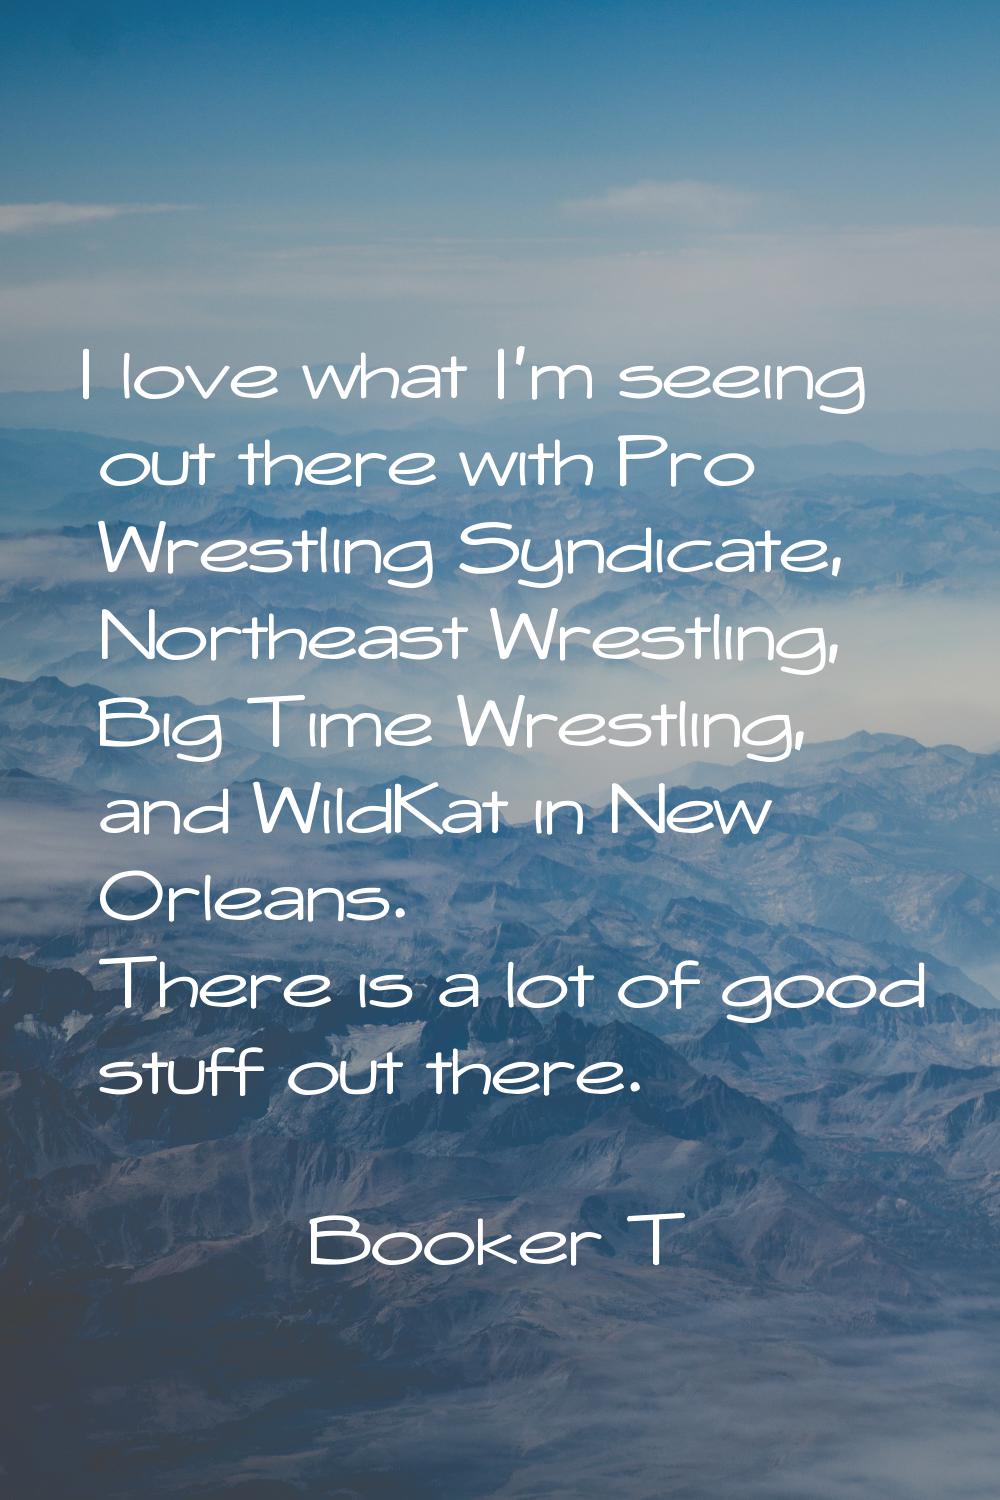 I love what I'm seeing out there with Pro Wrestling Syndicate, Northeast Wrestling, Big Time Wrestl